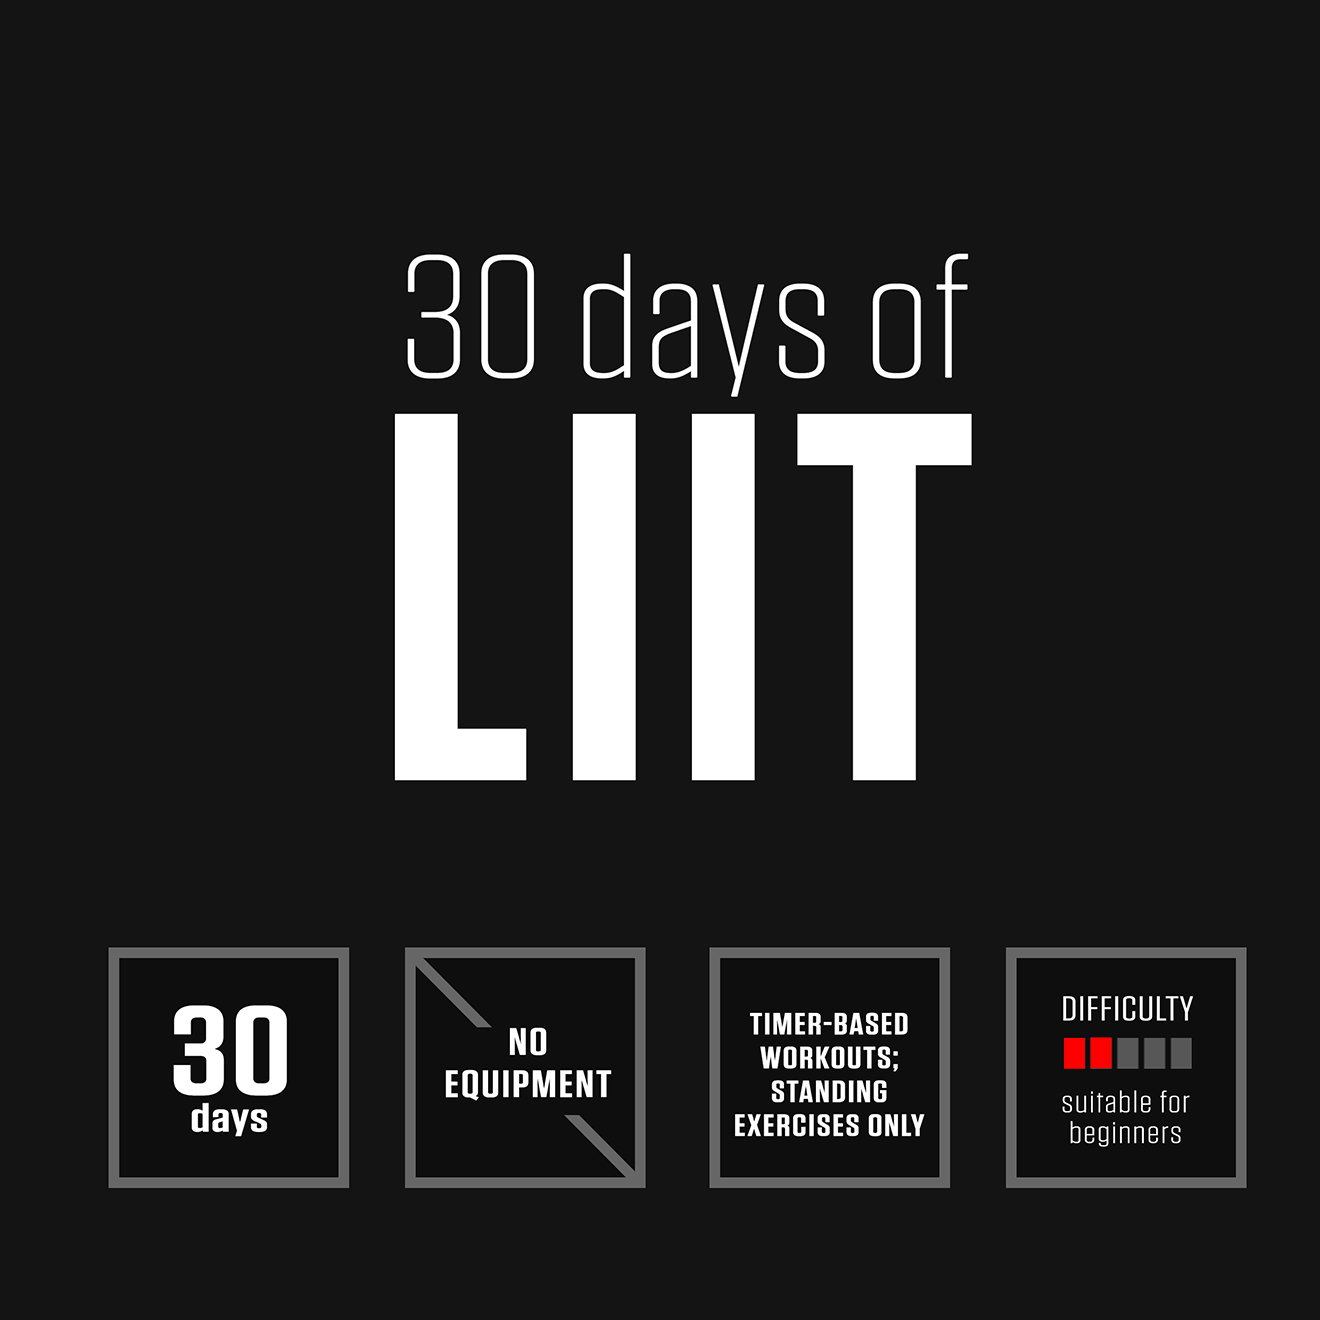 30 Days of LIIT